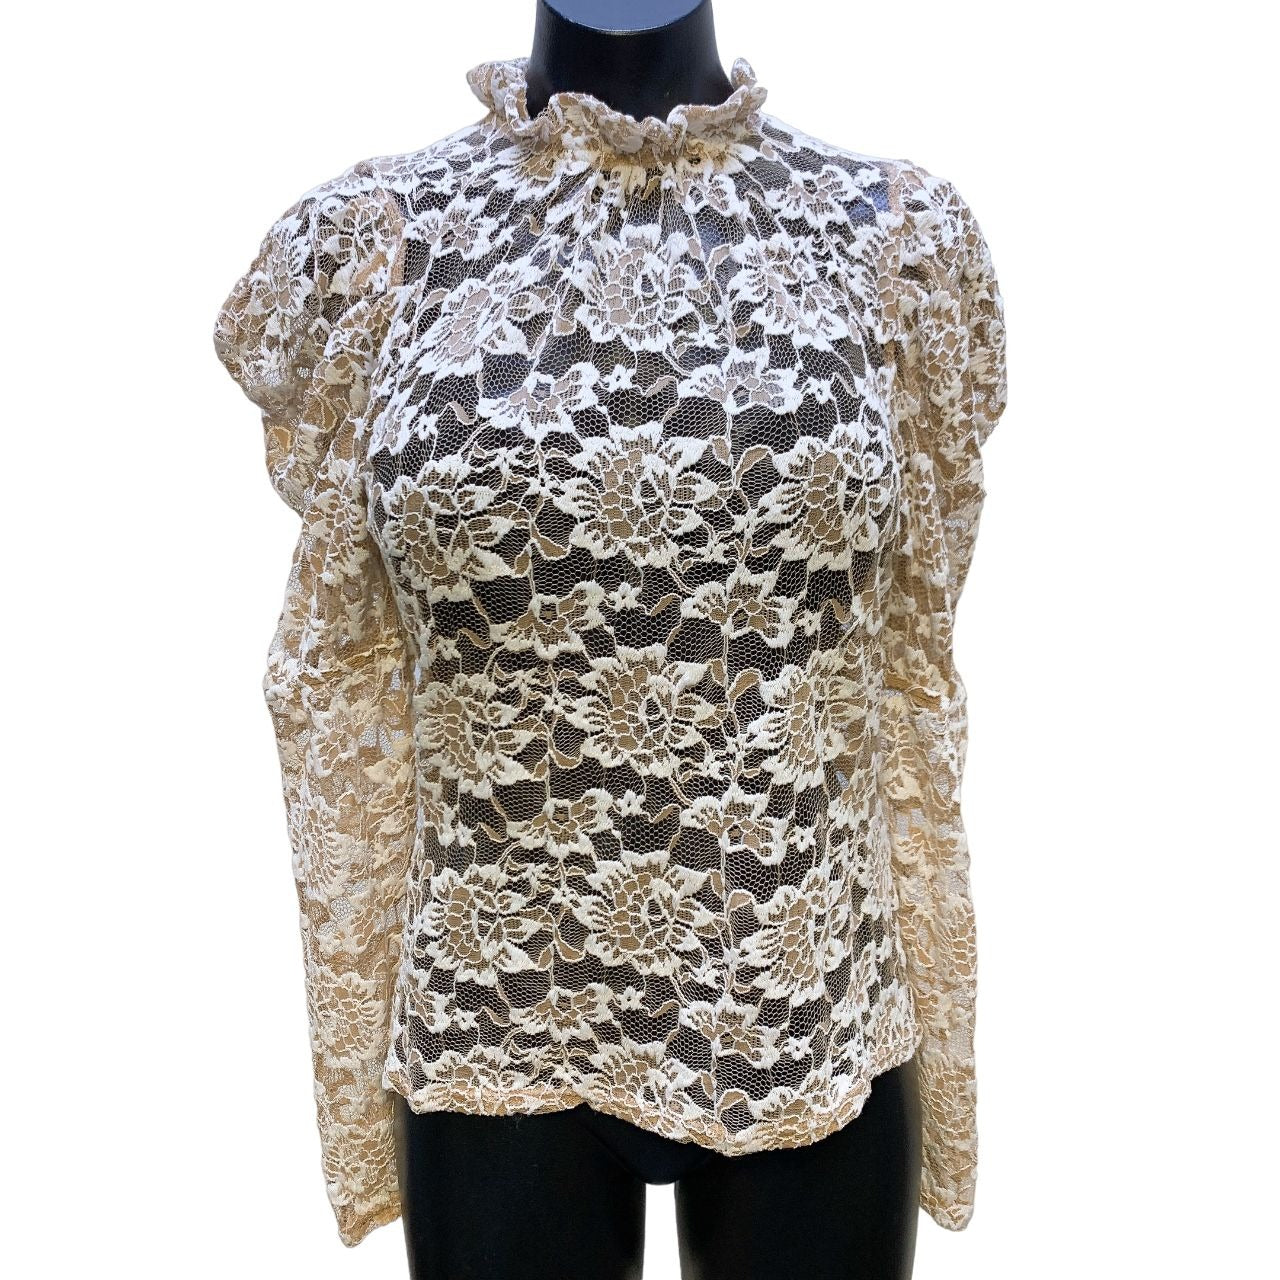 *NWT Dolan Anthropologie Ivory Lace Blouse Small